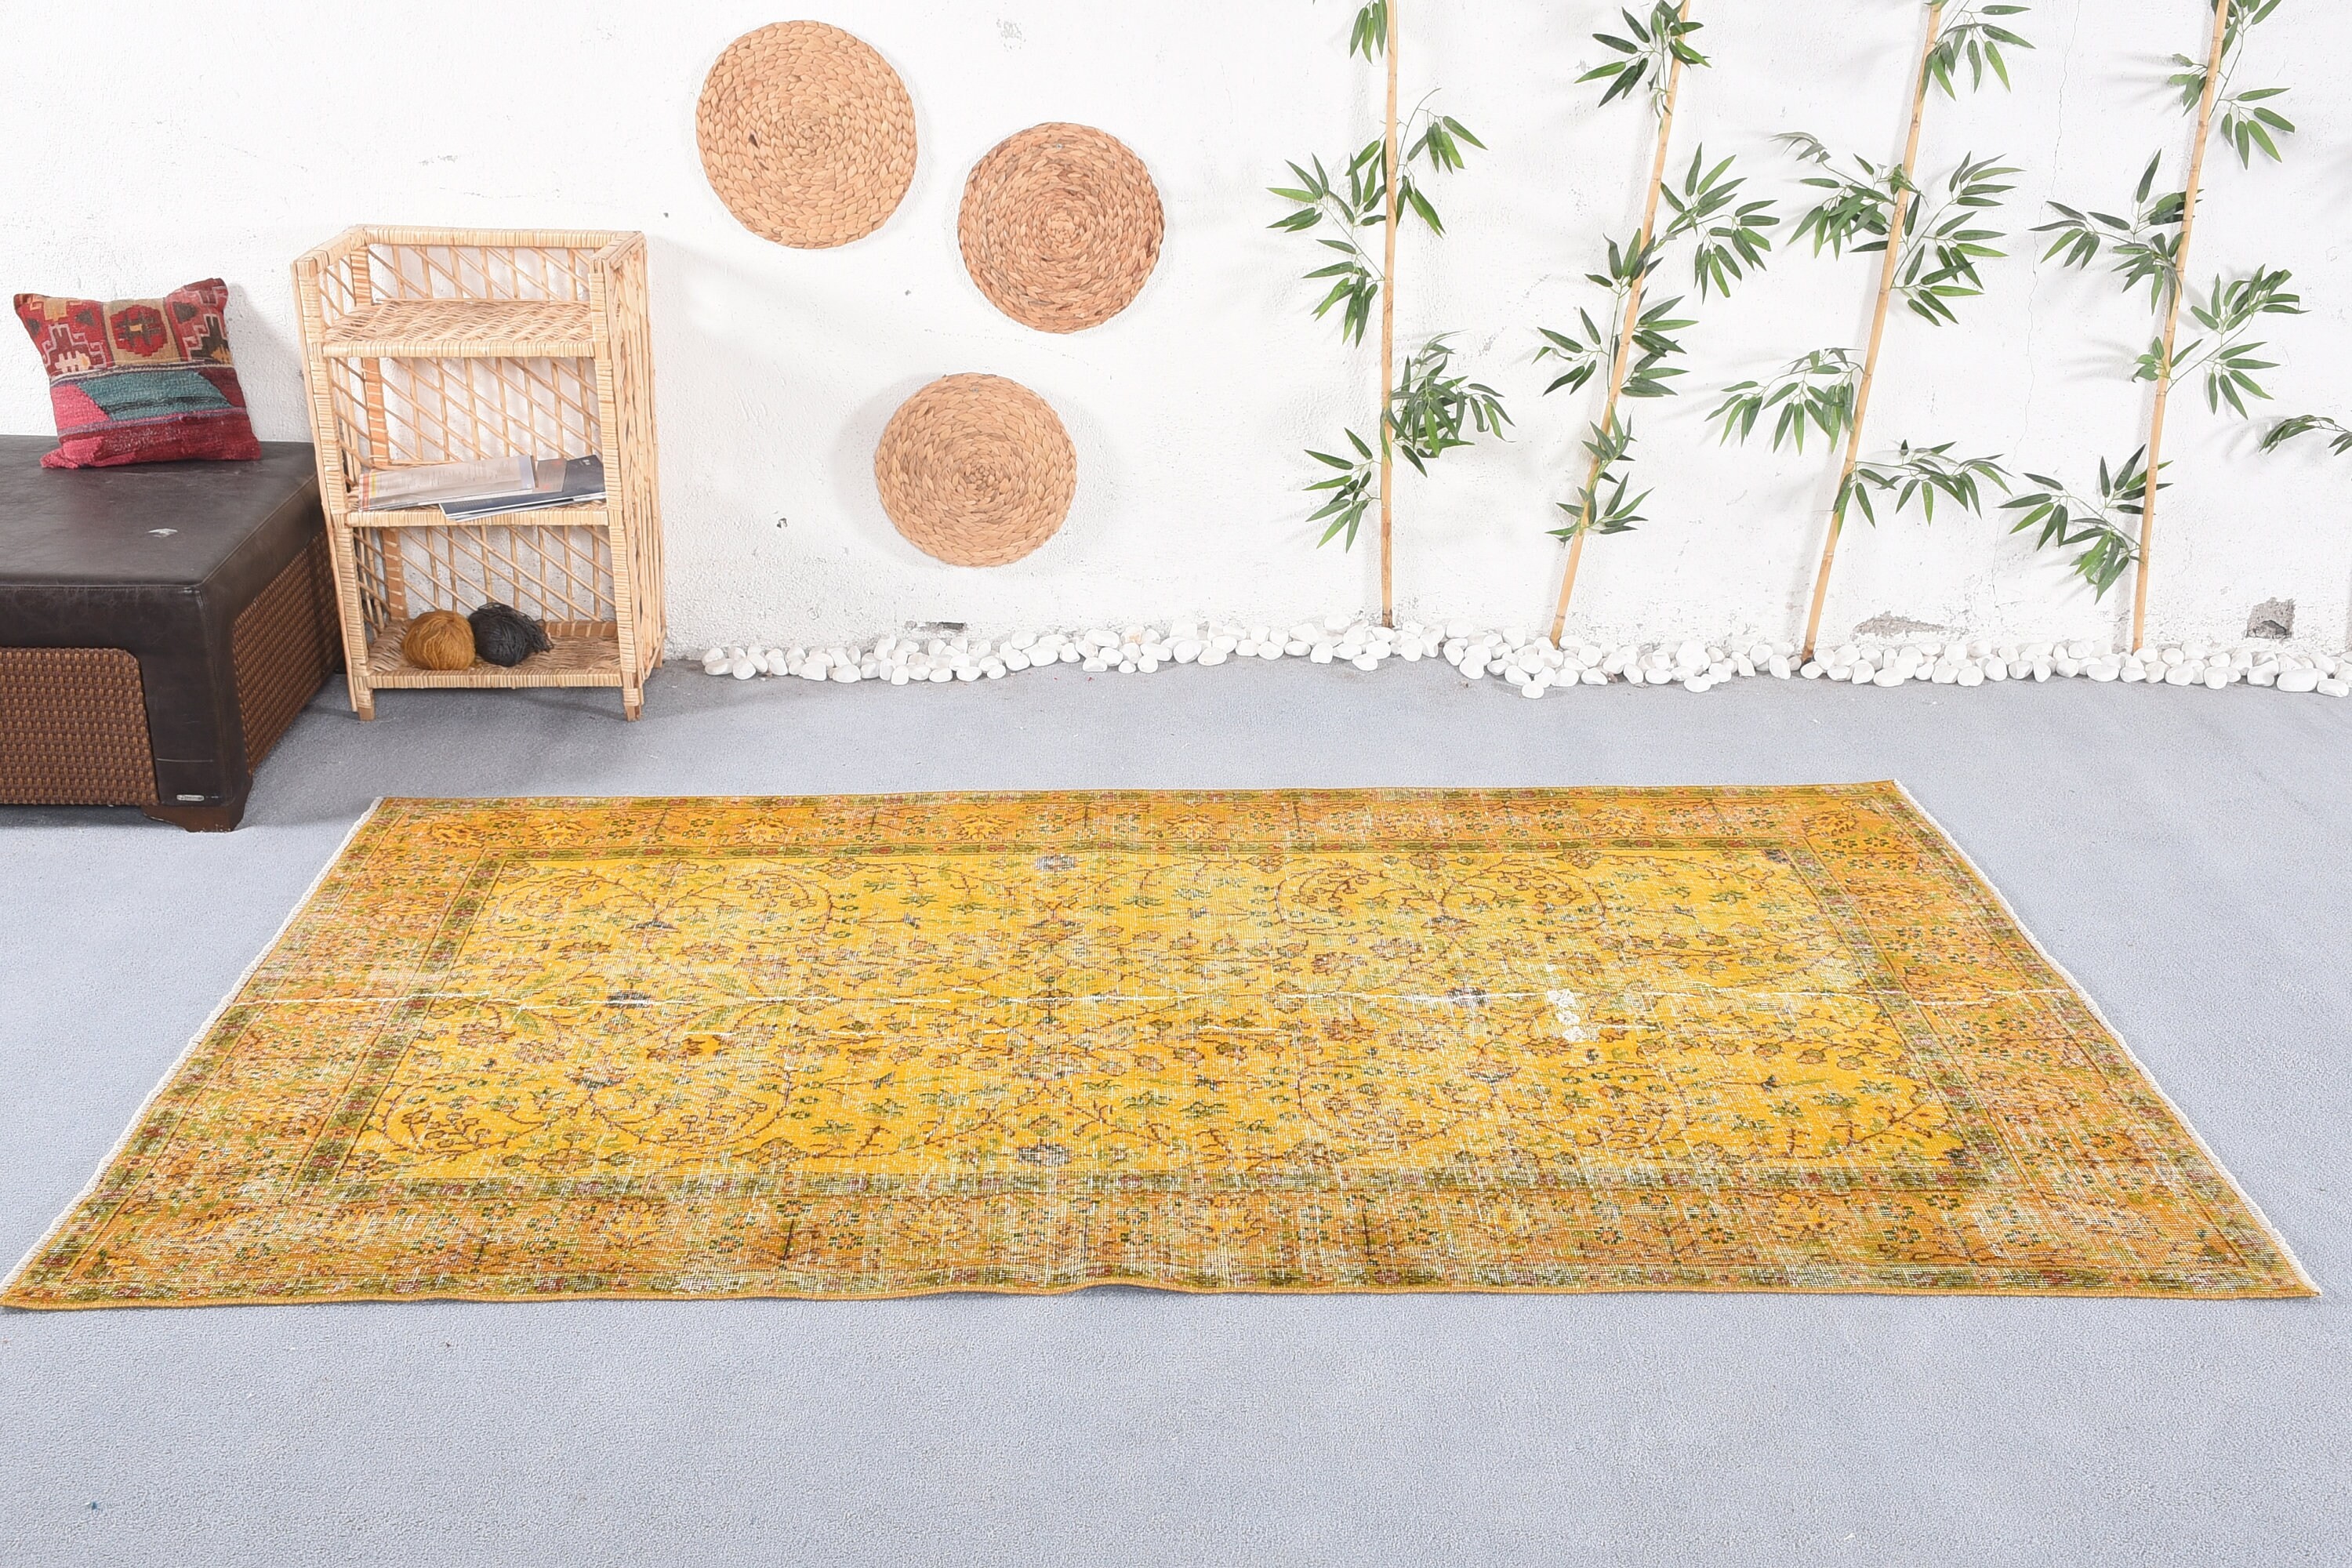 Yellow  4.9x8.2 ft Large Rugs, Salon Rugs, Turkish Rug, Kitchen Rug, Wool Rug, Rugs for Salon, Dining Room Rug, Vintage Rug